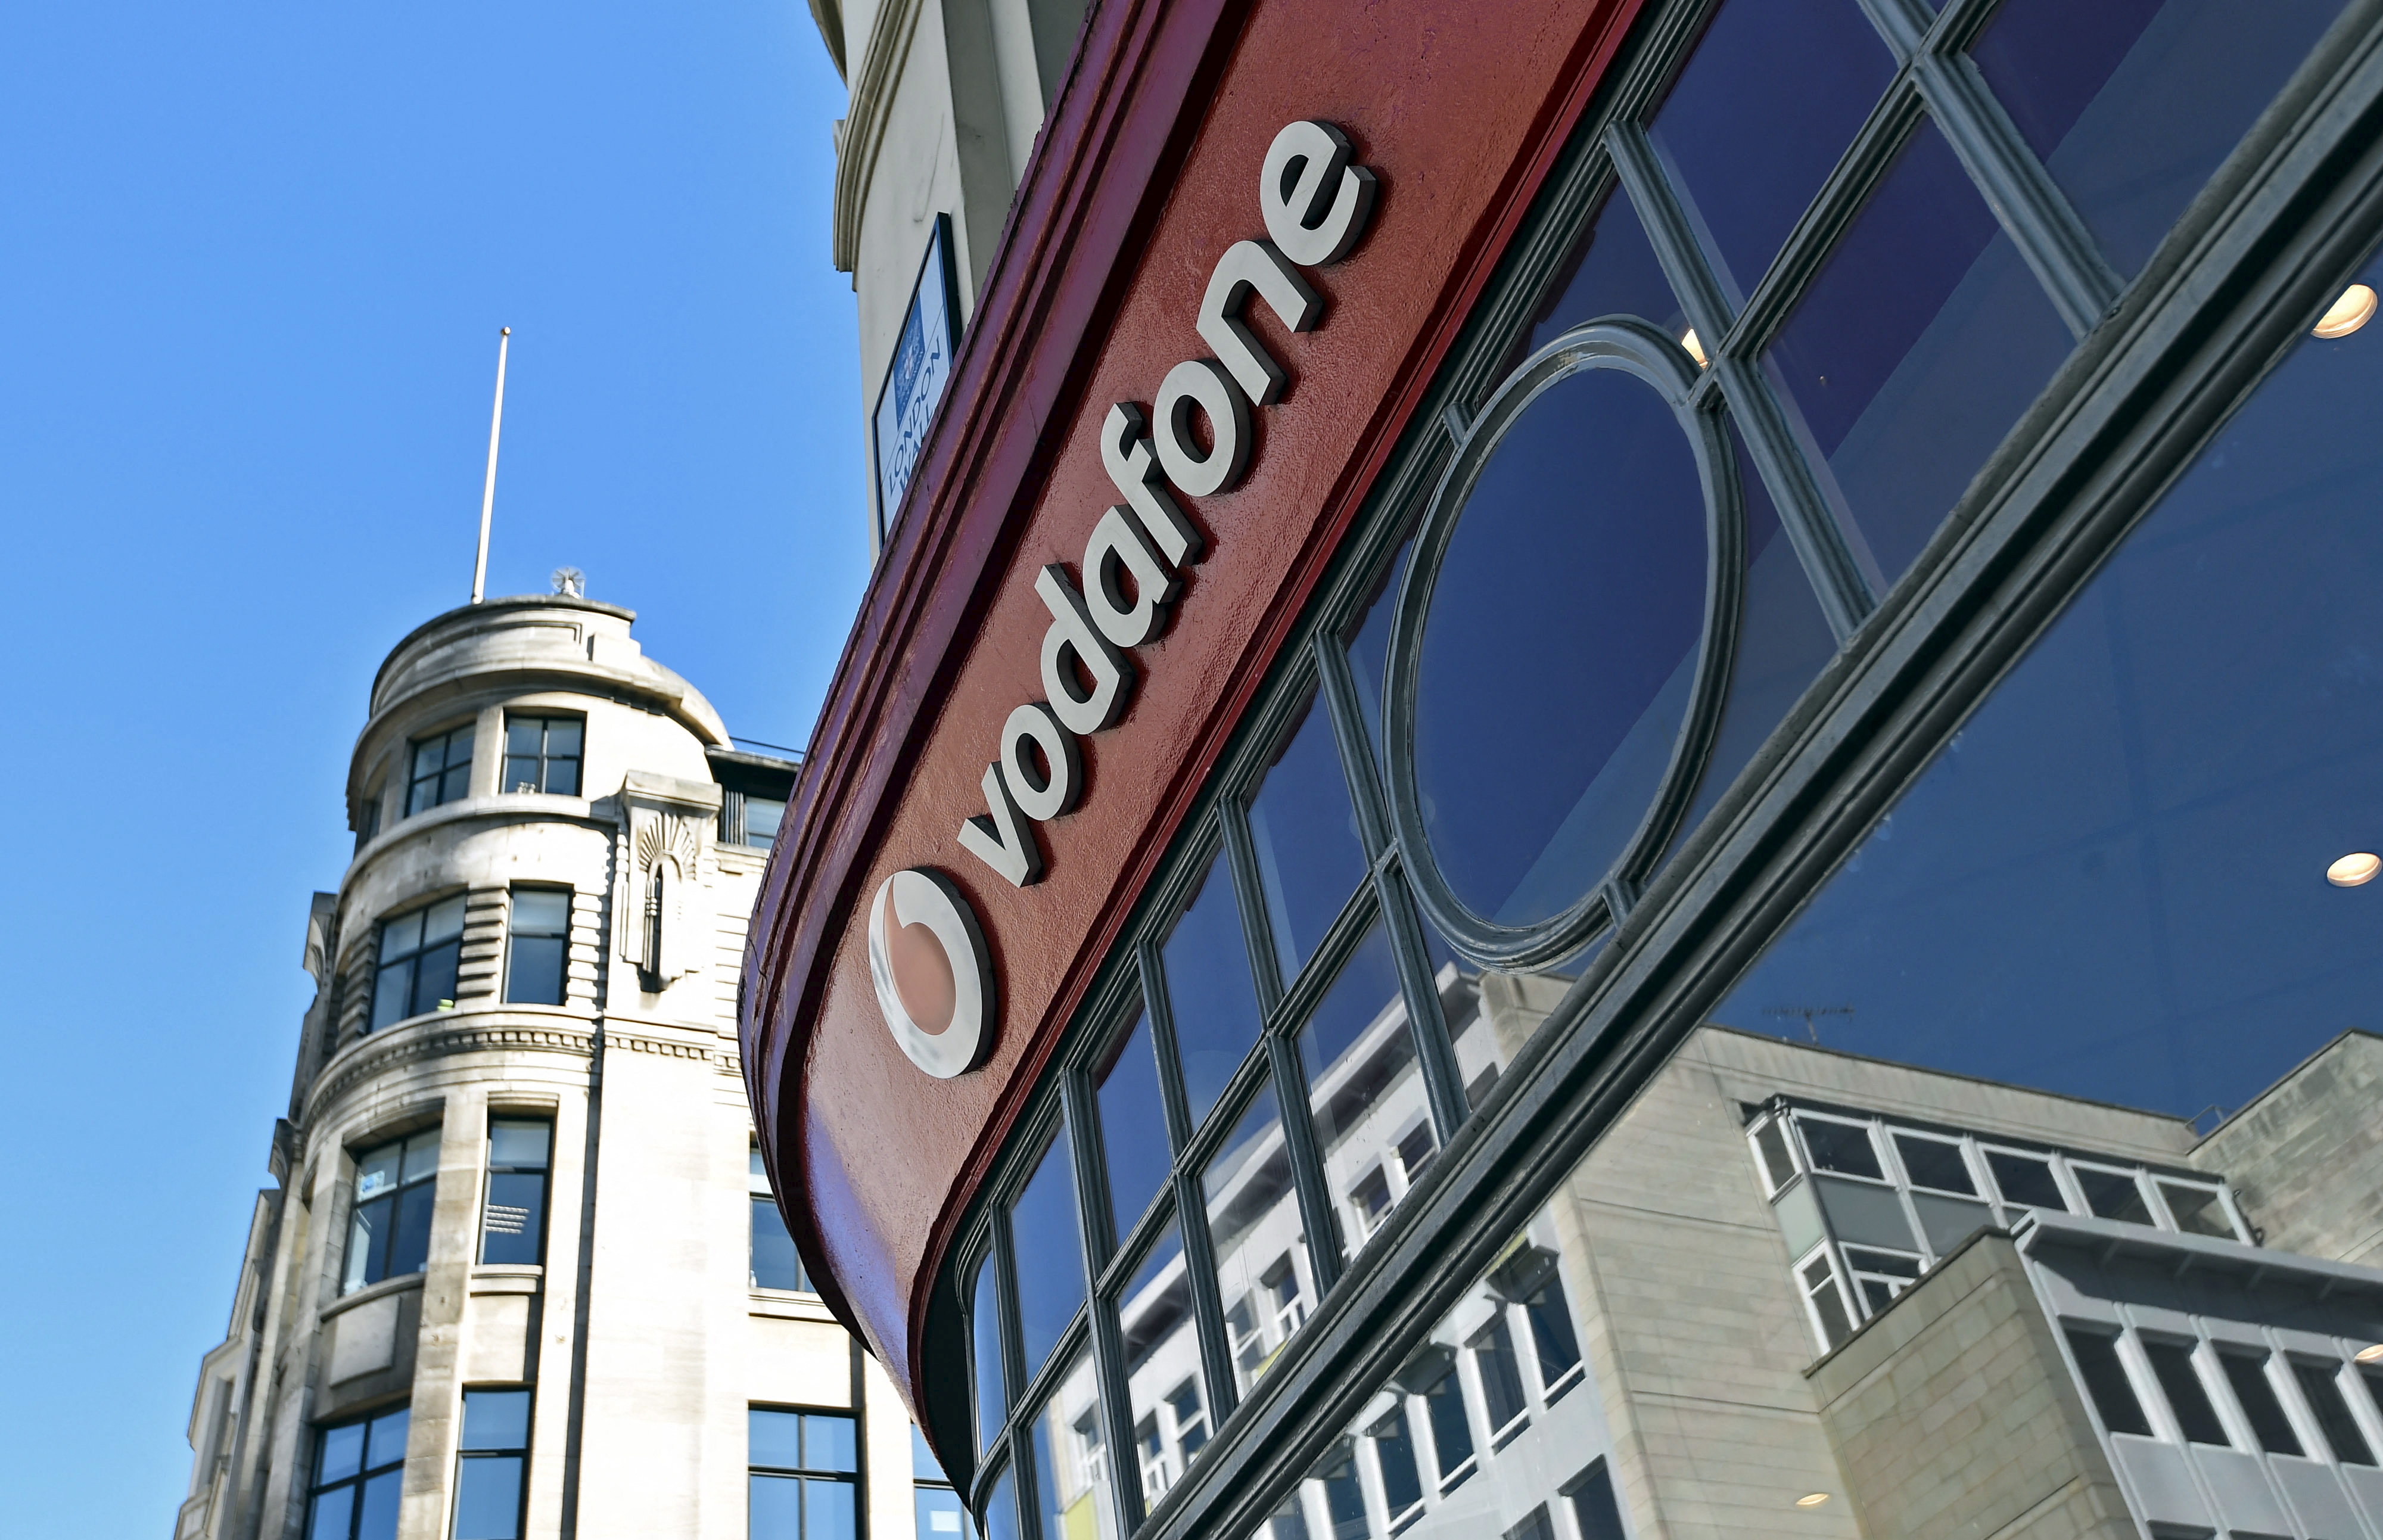 Branding for Vodafone is seen on the exterior of a shop in London, Britain